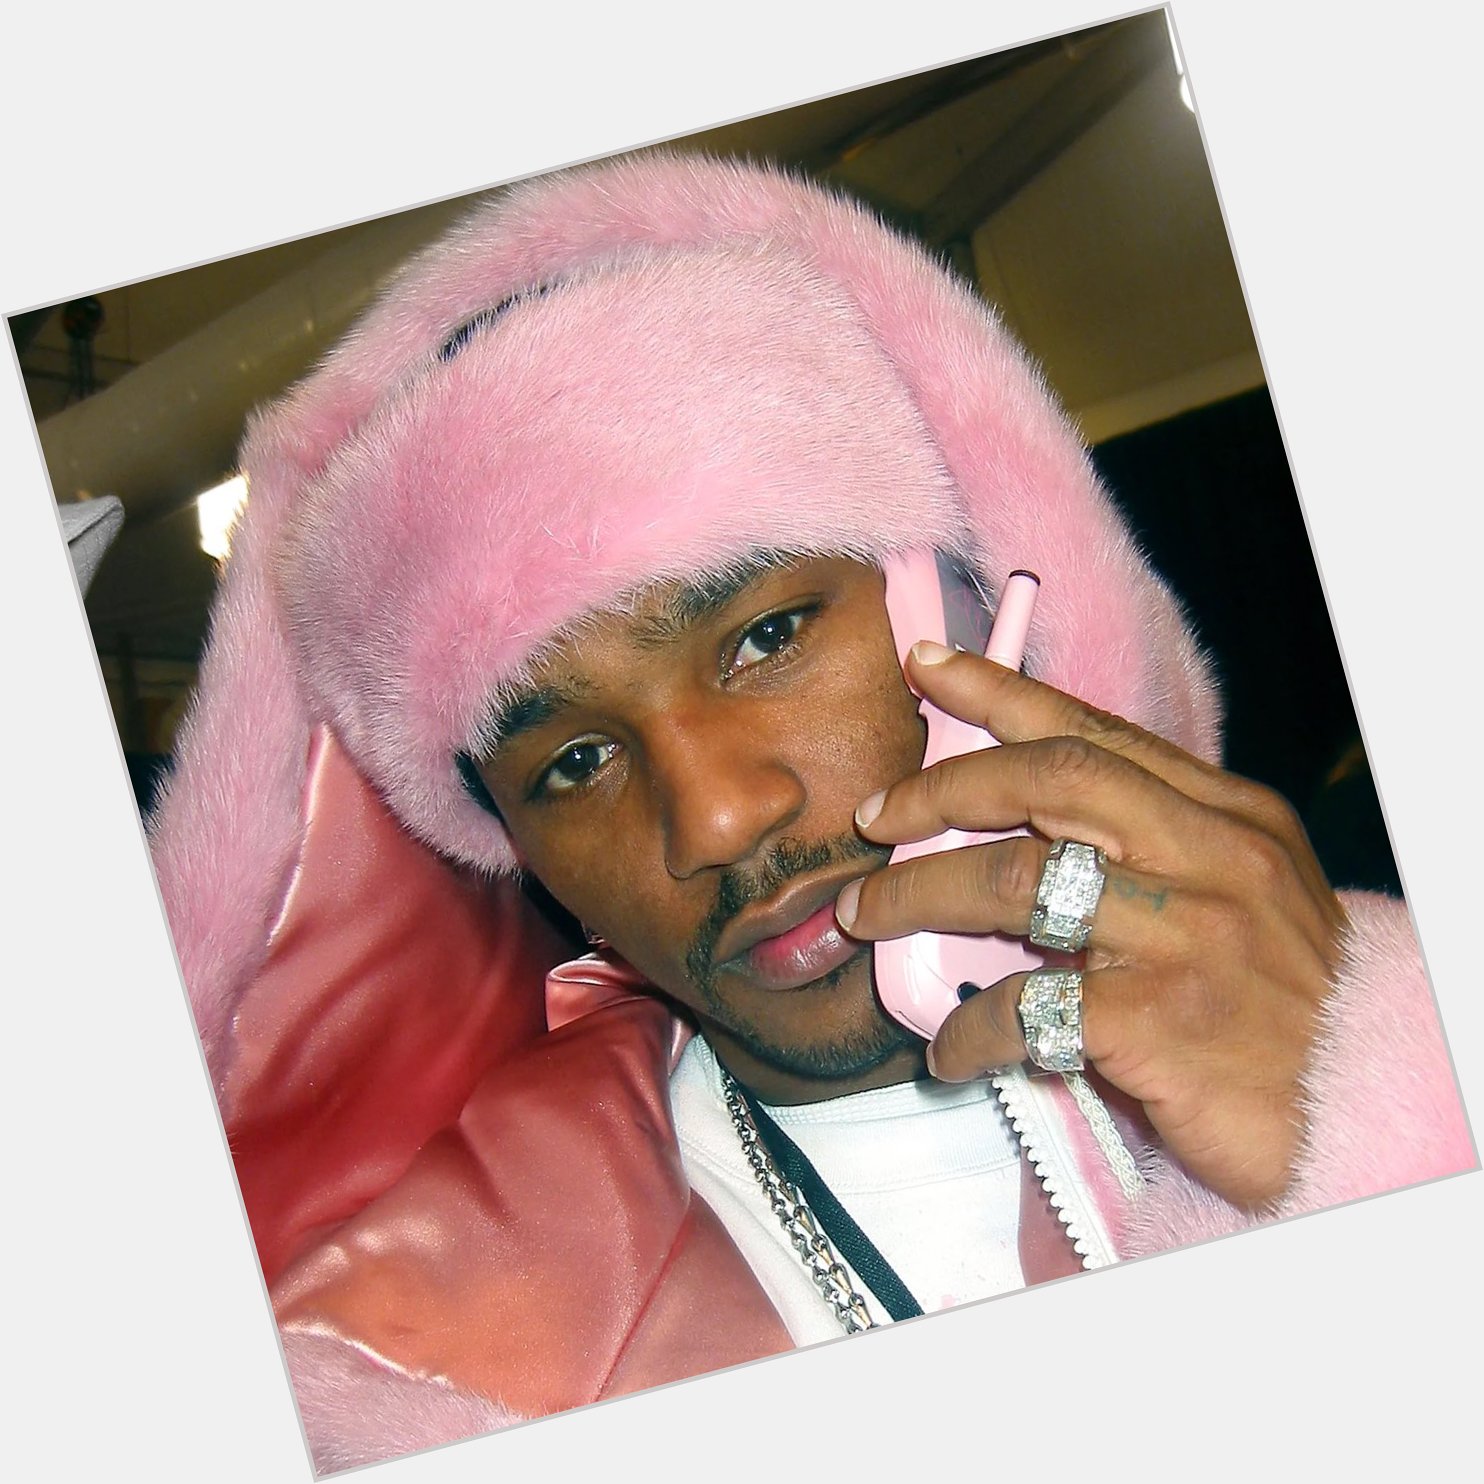 Happy 45th Birthday to Cam ron  . What s your fav Cam ron jam?  